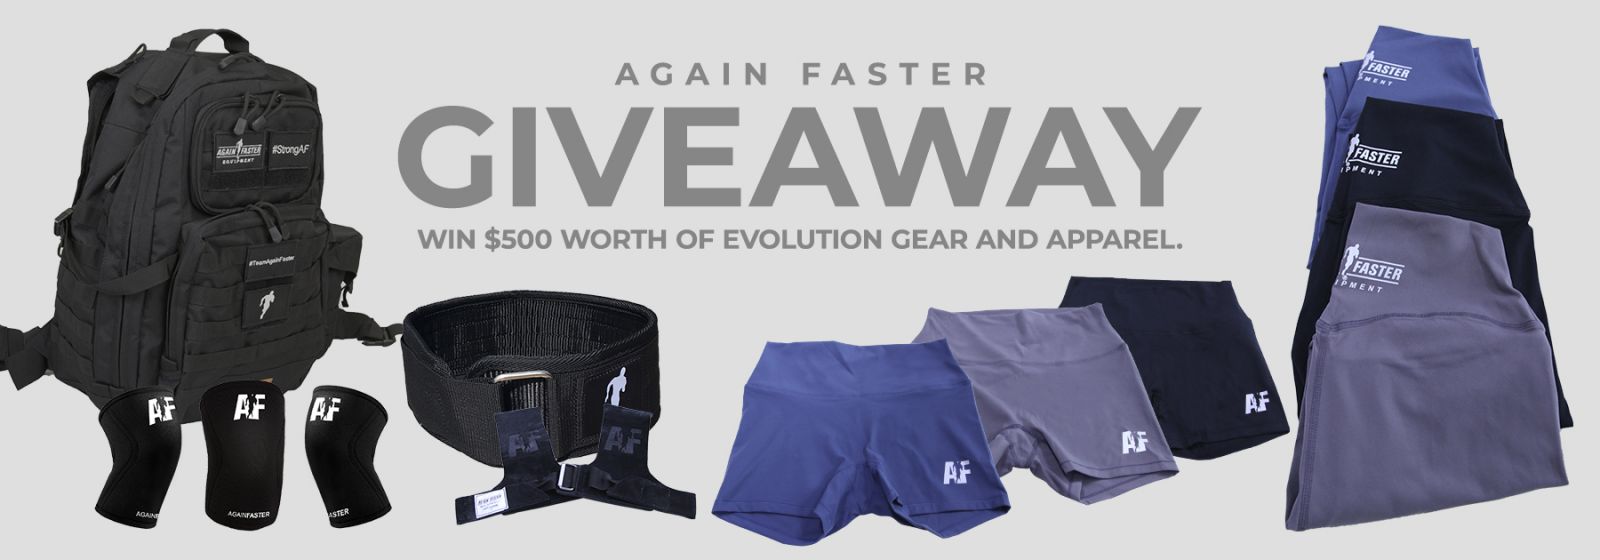 Evolution Shorts and Tights Giveaway - Again Faster Banner